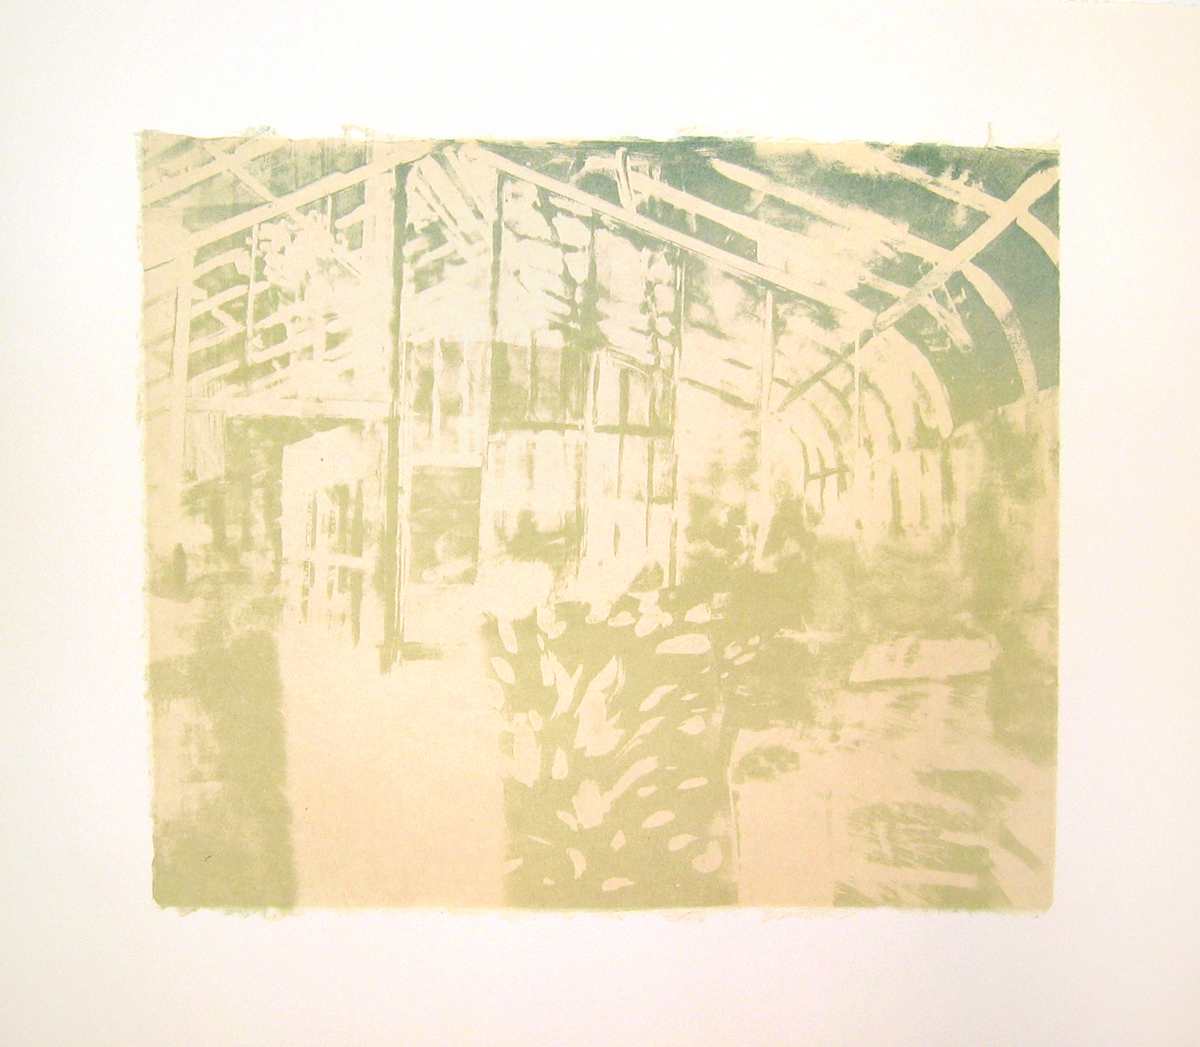    Greenhouse Glow   by Joel Janowitz 2005  Edition of 20  | Lithography with Kitakata chine collé on Arches Cover  |  image: 17" x 20 1/2"  |  paper: 24" x 27 1/2"  | $700 